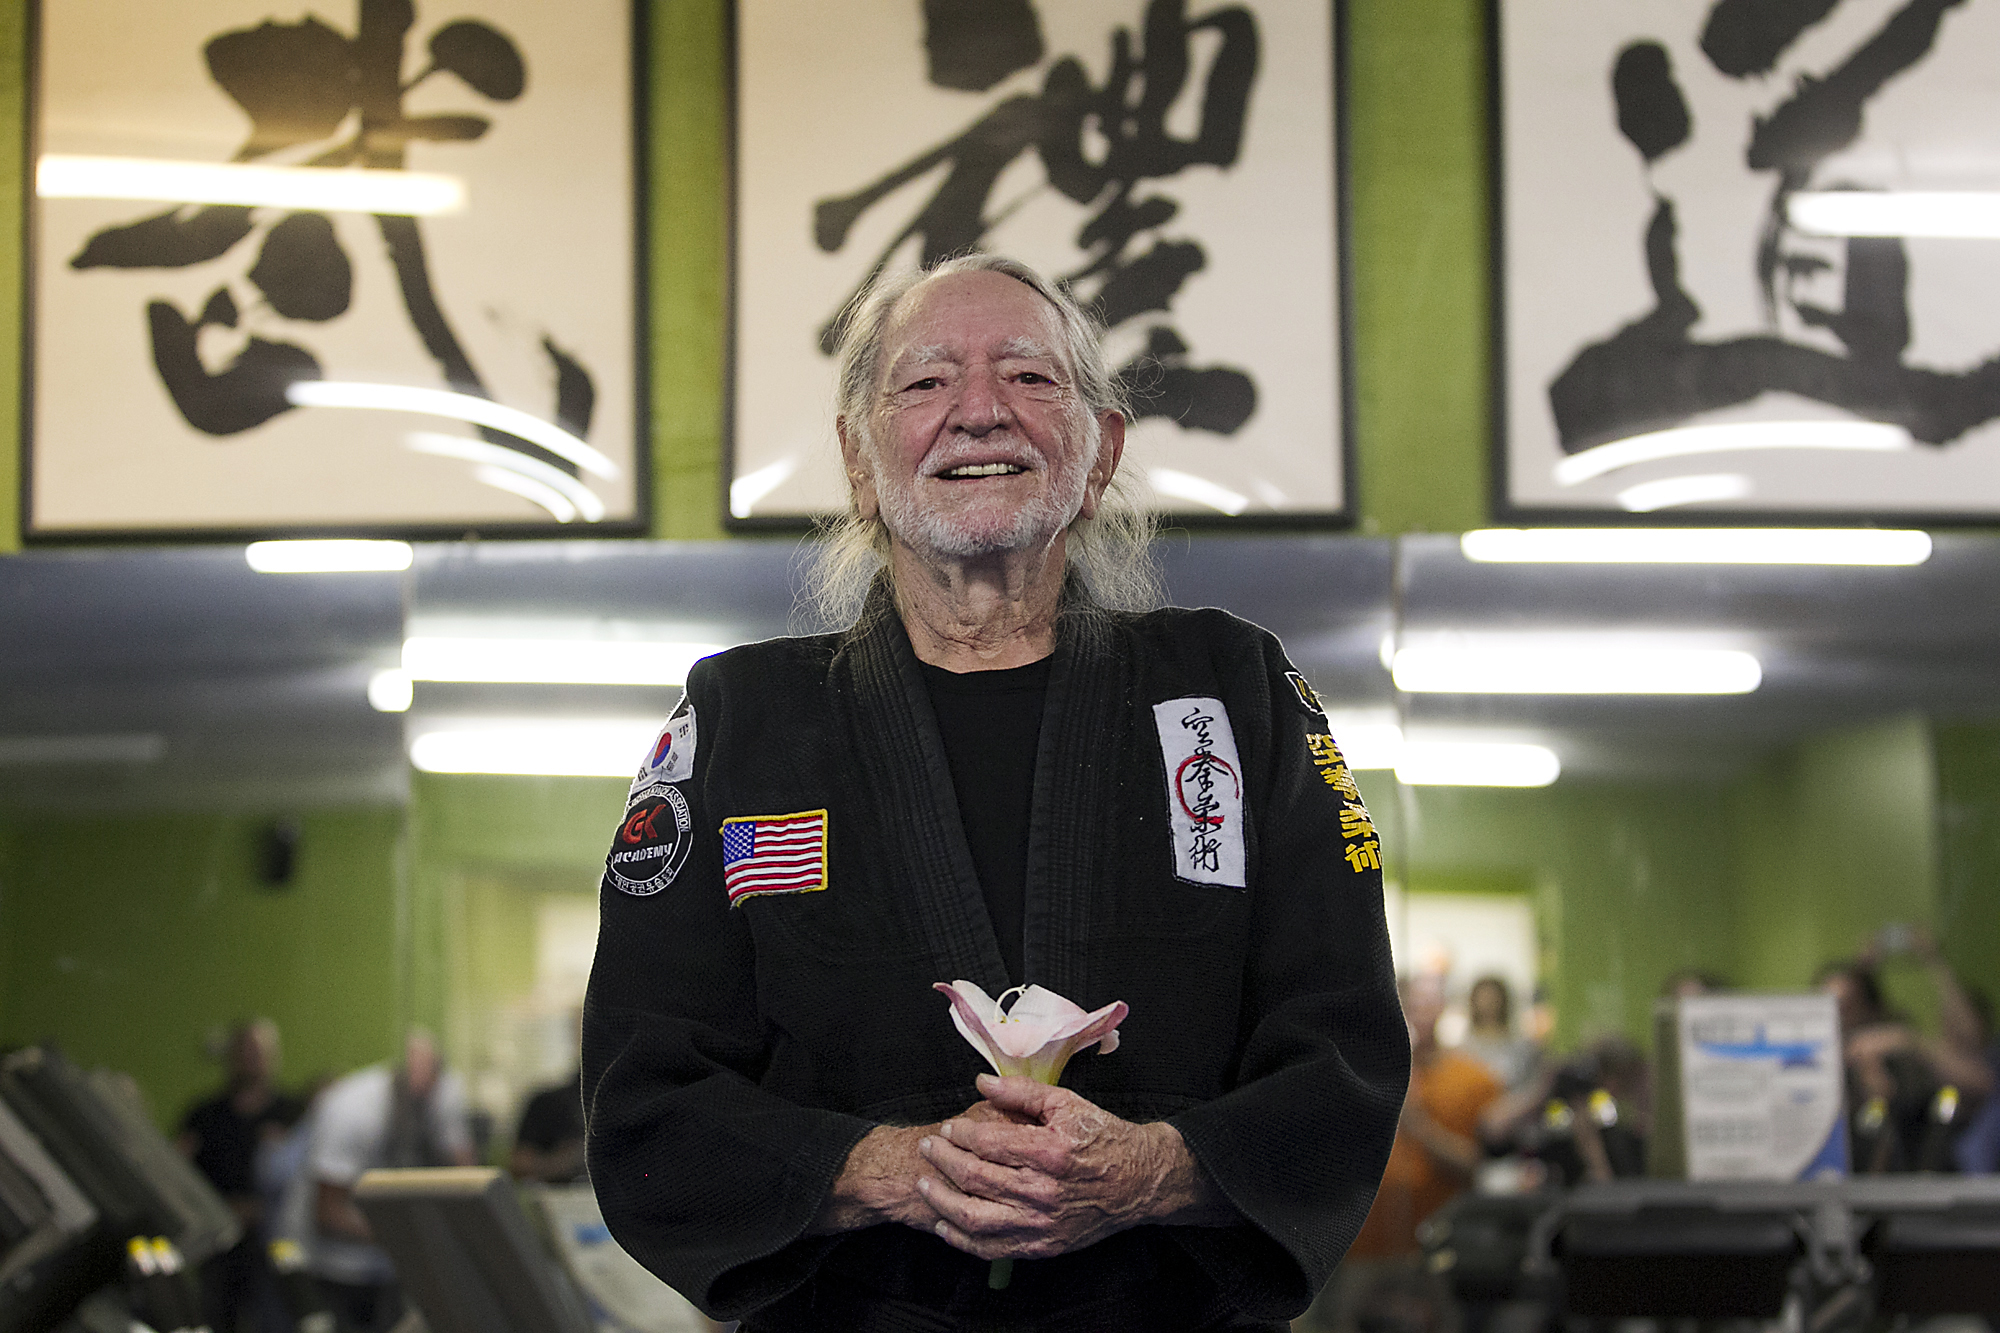 Willie Nelson, the country music icon who turns 81 this week, smiles as he receives his fifth-degree black belt in the martial art of Gong Kwon Yu Sul on Monday, April 28, 2014, in Austin, Texas. (Ralph Barrera / AP)